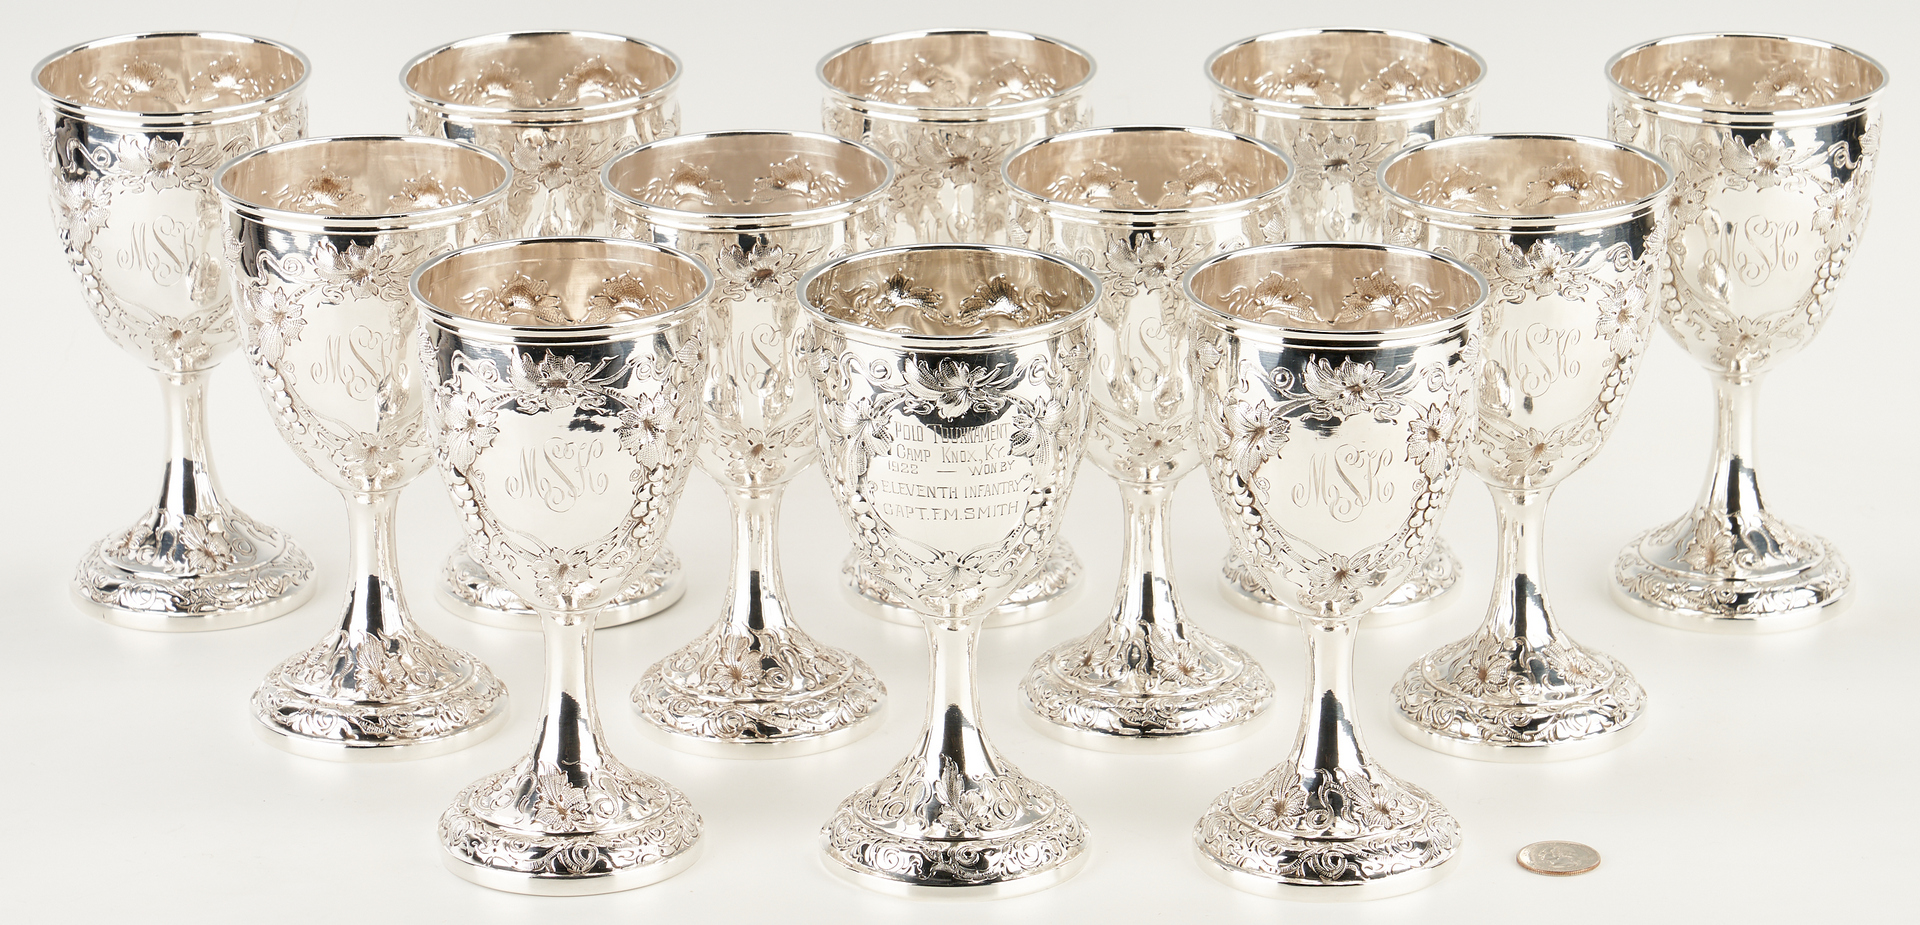 Lot 5: Set of 12 Chinese Export Sterling Silver Goblets, 11 marked Yu Chang